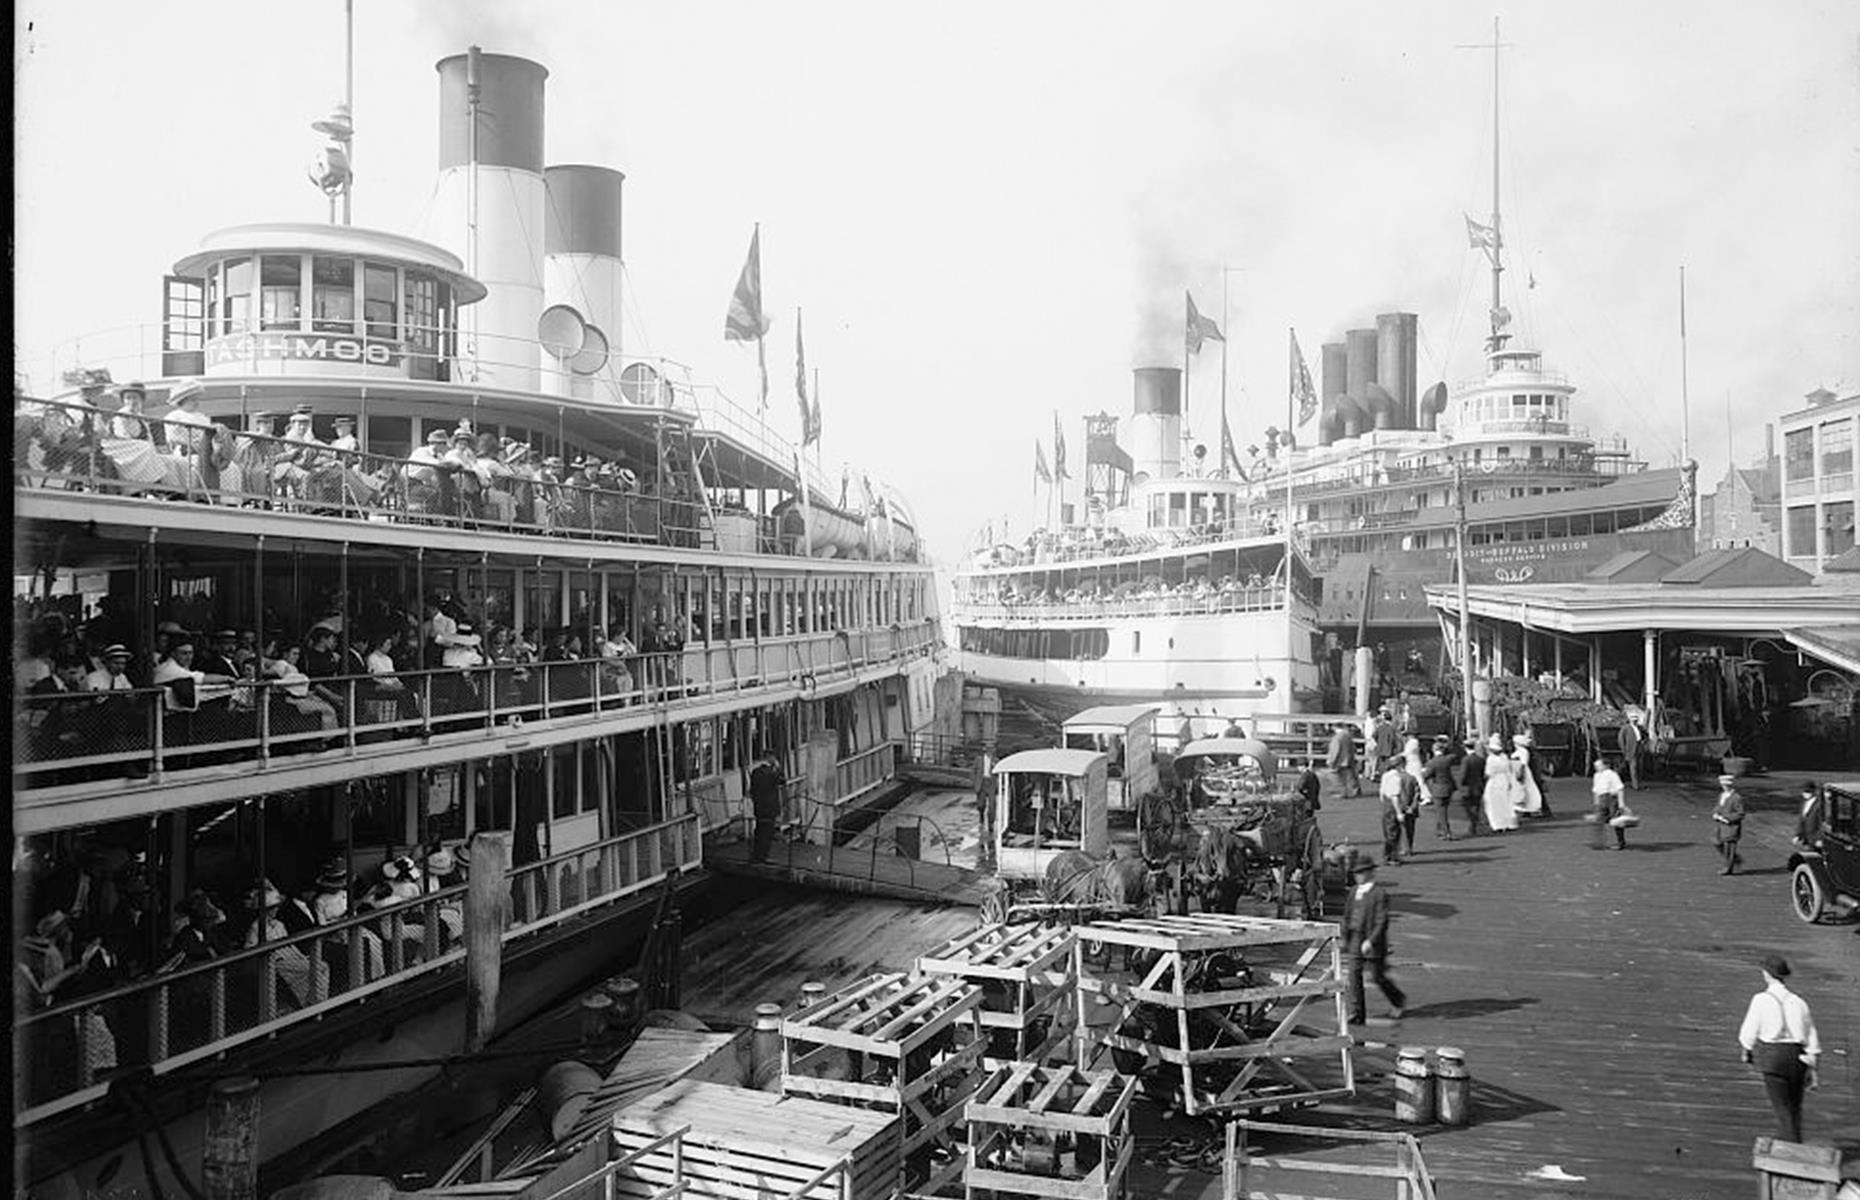 <p>At the turn of the century, there was still a frisson around cruising and large, buzzy crowds would often gather to see off the ships. This nostalgic photograph was snapped between 1900 and 1915, and shows large steam boats leaving from the White Star Line dock in Detroit, Michigan. Well-dressed passengers fill the ships' upper and lower decks too.</p>  <p><strong><a href="http://www.loveexploring.com/galleries/67628/where-planes-trains-cruise-ships-and-automobiles-go-to-die?page=1">Discover where planes, trains, cruise ships and cars go to di</a></strong><a href="http://www.loveexploring.com/galleries/67628/where-planes-trains-cruise-ships-and-automobiles-go-to-die?page=1"><strong>e</strong></a></p>